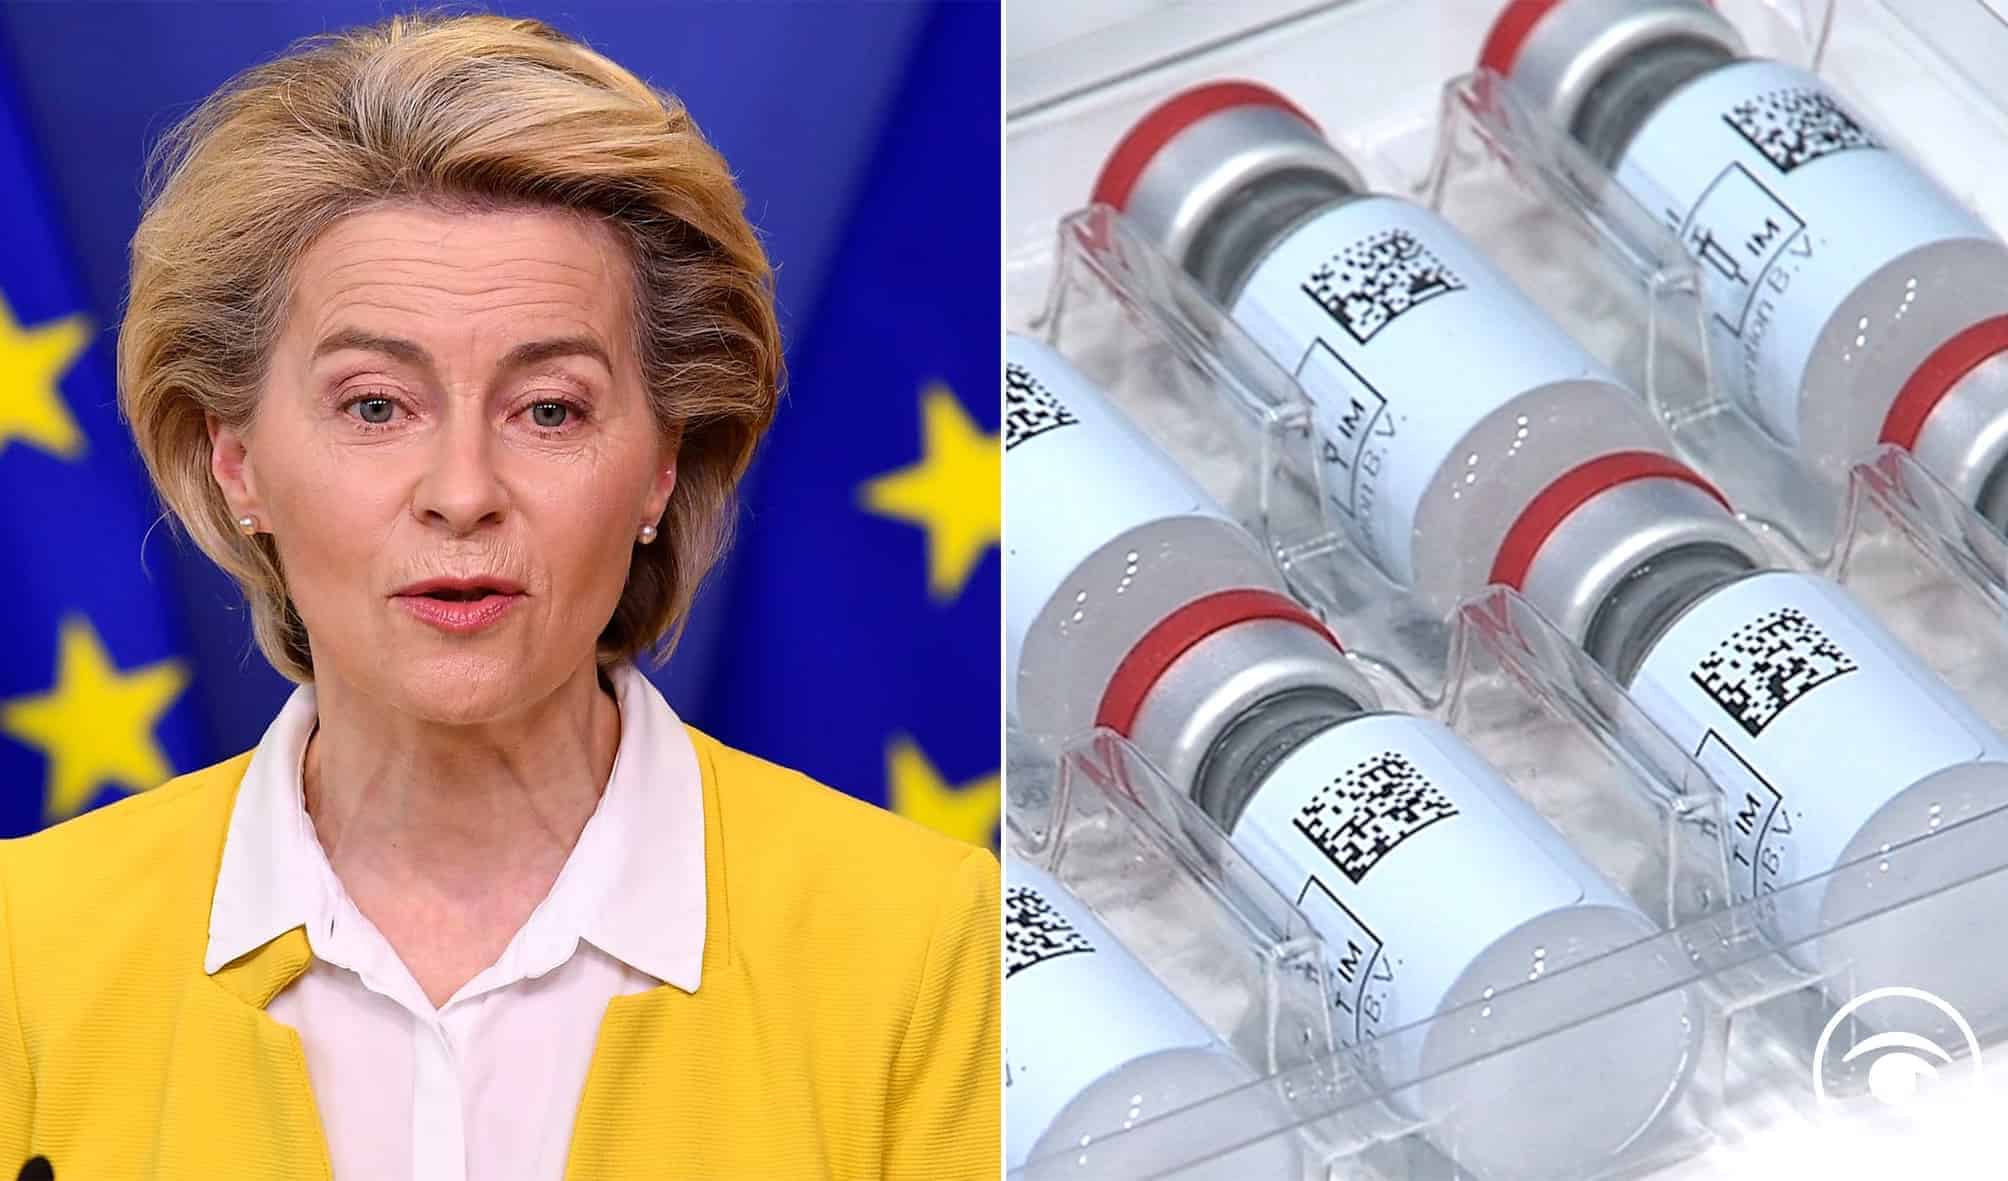 EU to discuss US proposal to share vaccine patents as UK remains on sideline